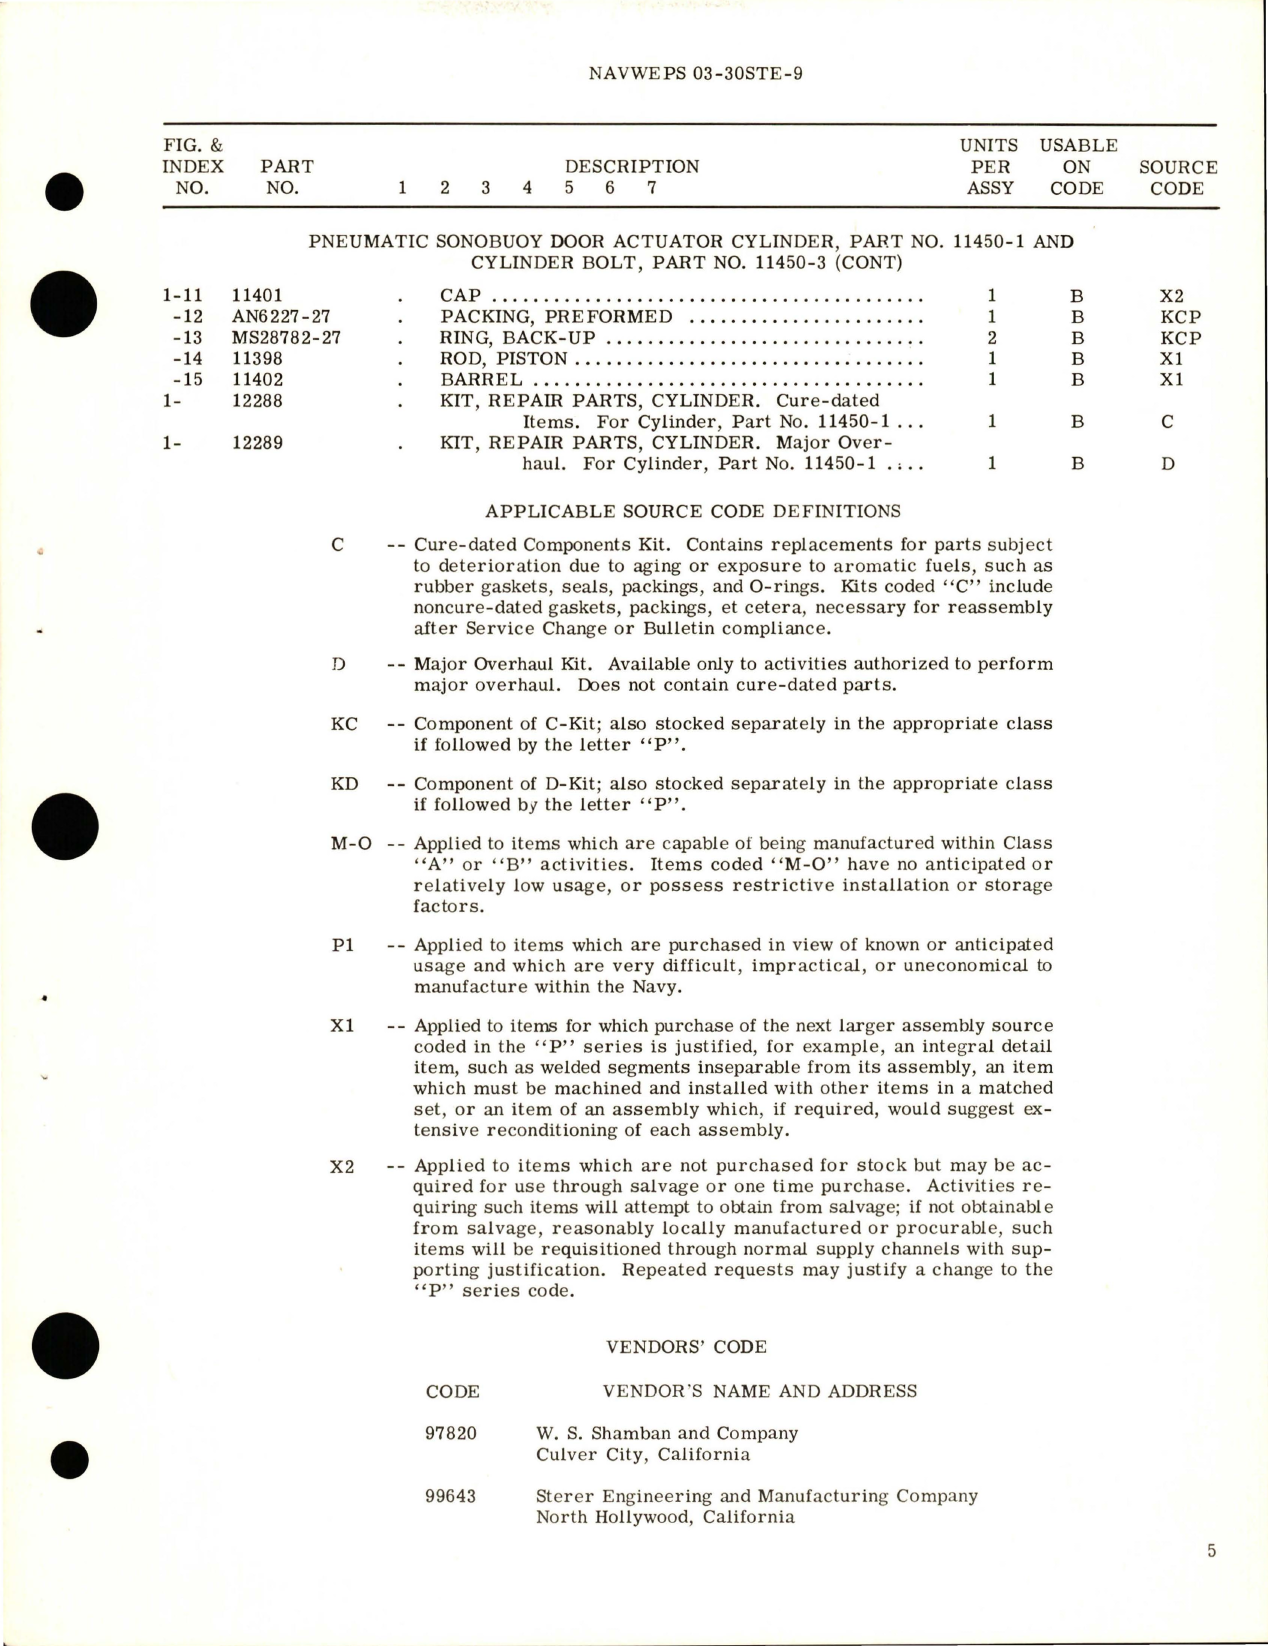 Sample page 5 from AirCorps Library document: Overhaul Instructions with Parts Breakdown for Pneumatic Sonobuoy Door Actuator Cylinder & Cylinder Bolt - Part 11450-1 and 11450-3